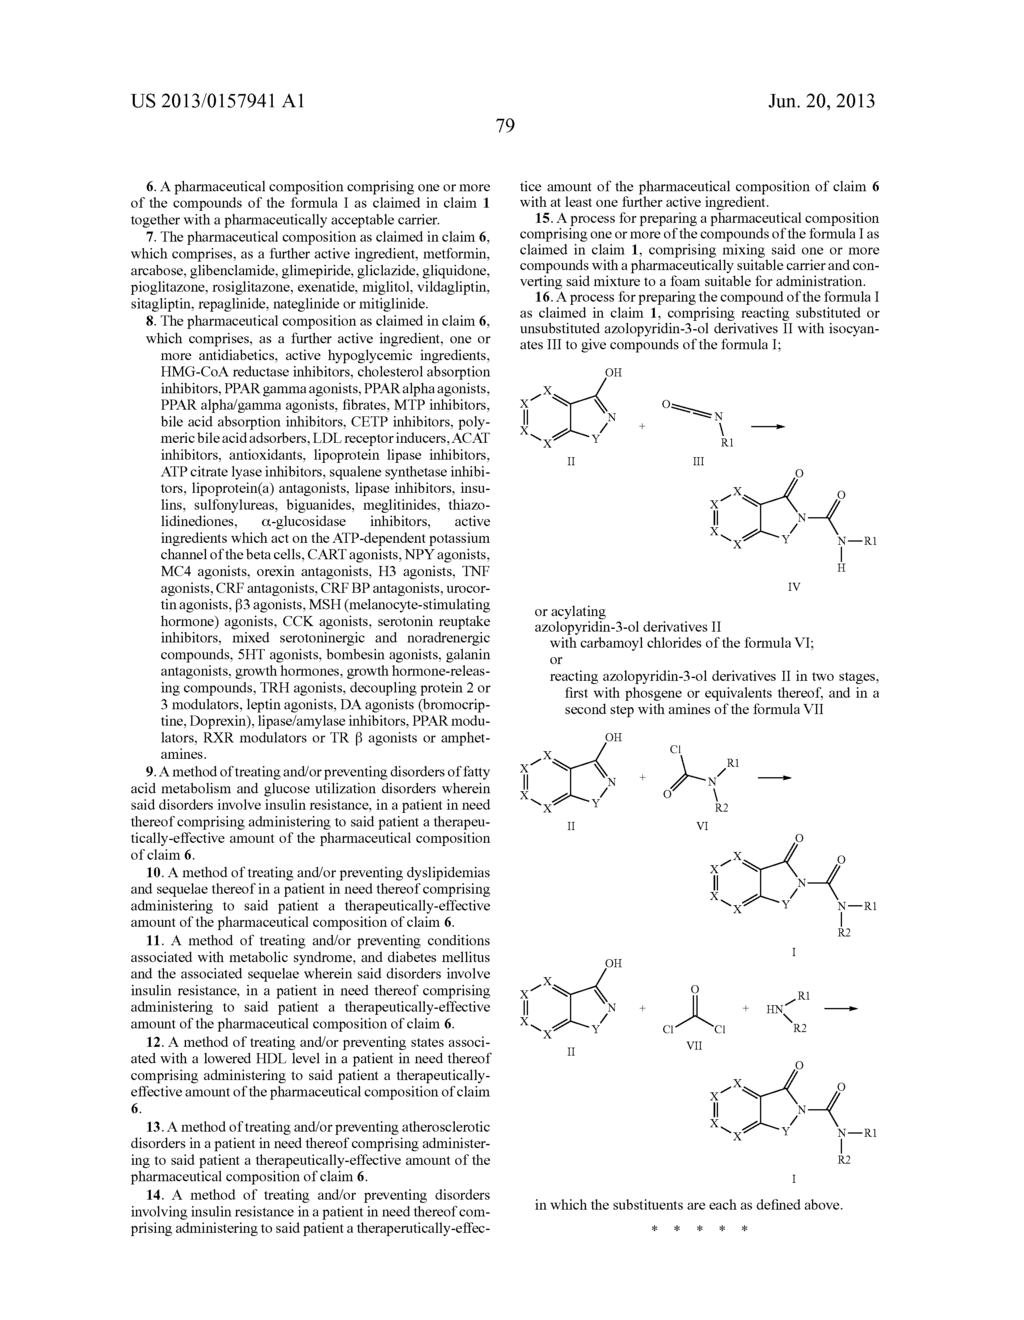 AZOLOPYRIDIN-3-ONE DERIVATIVES AS INHIBITORS OF LIPASES AND PHOSPHOLIPASES - diagram, schematic, and image 80